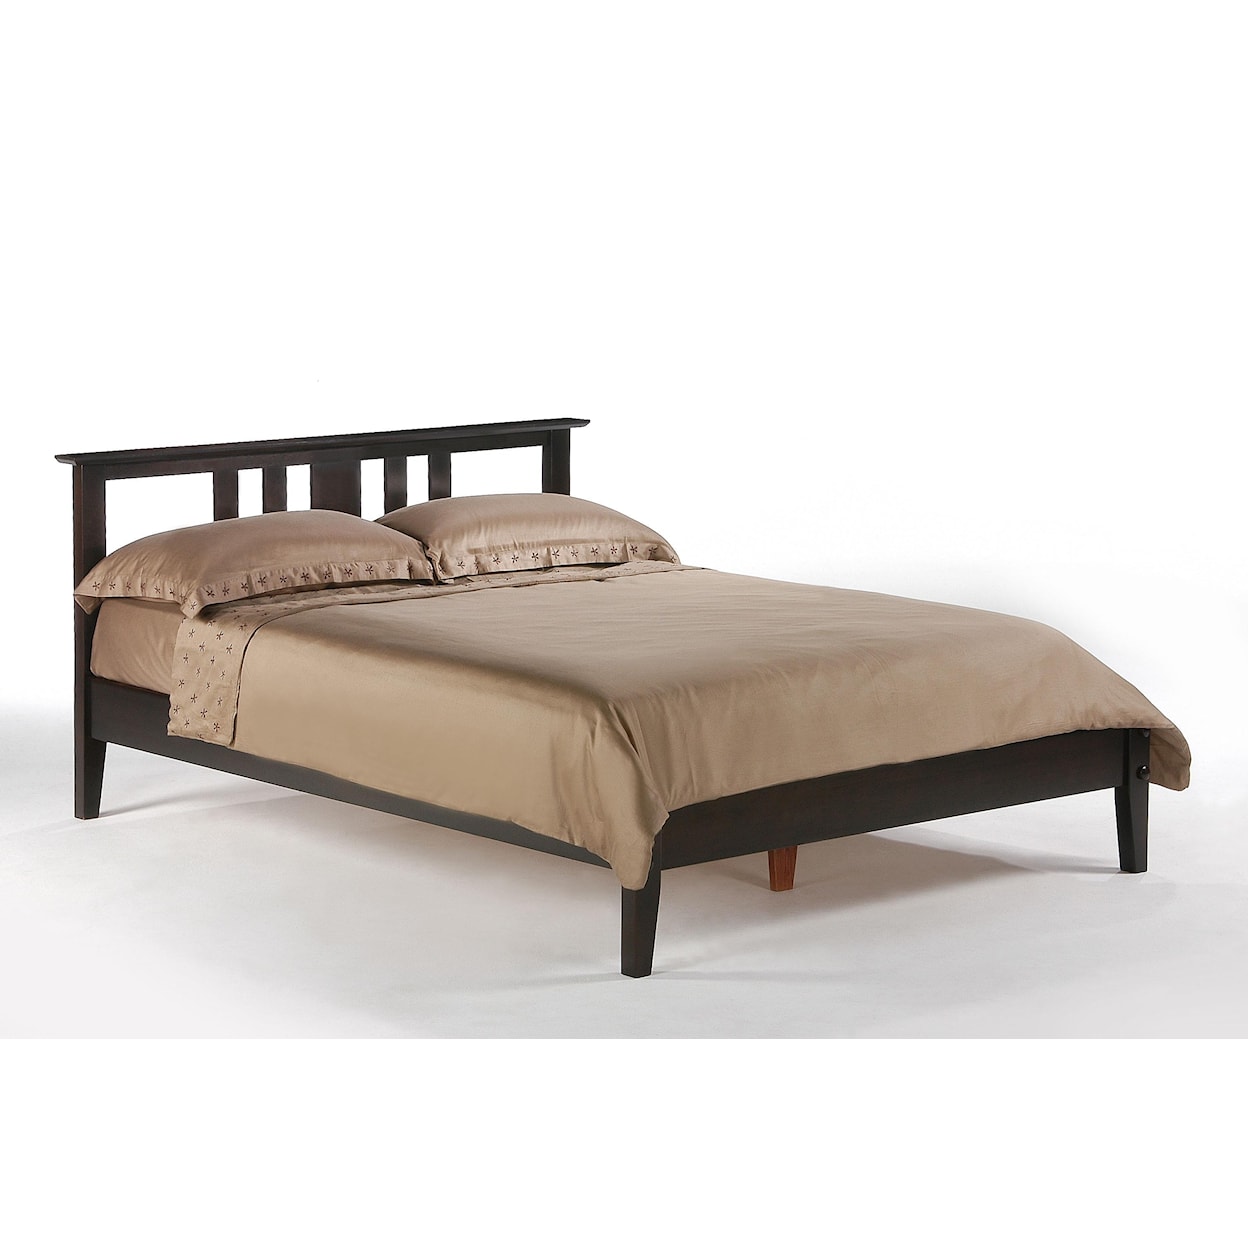 Pacific Manufacturing Thyme Queen Bed